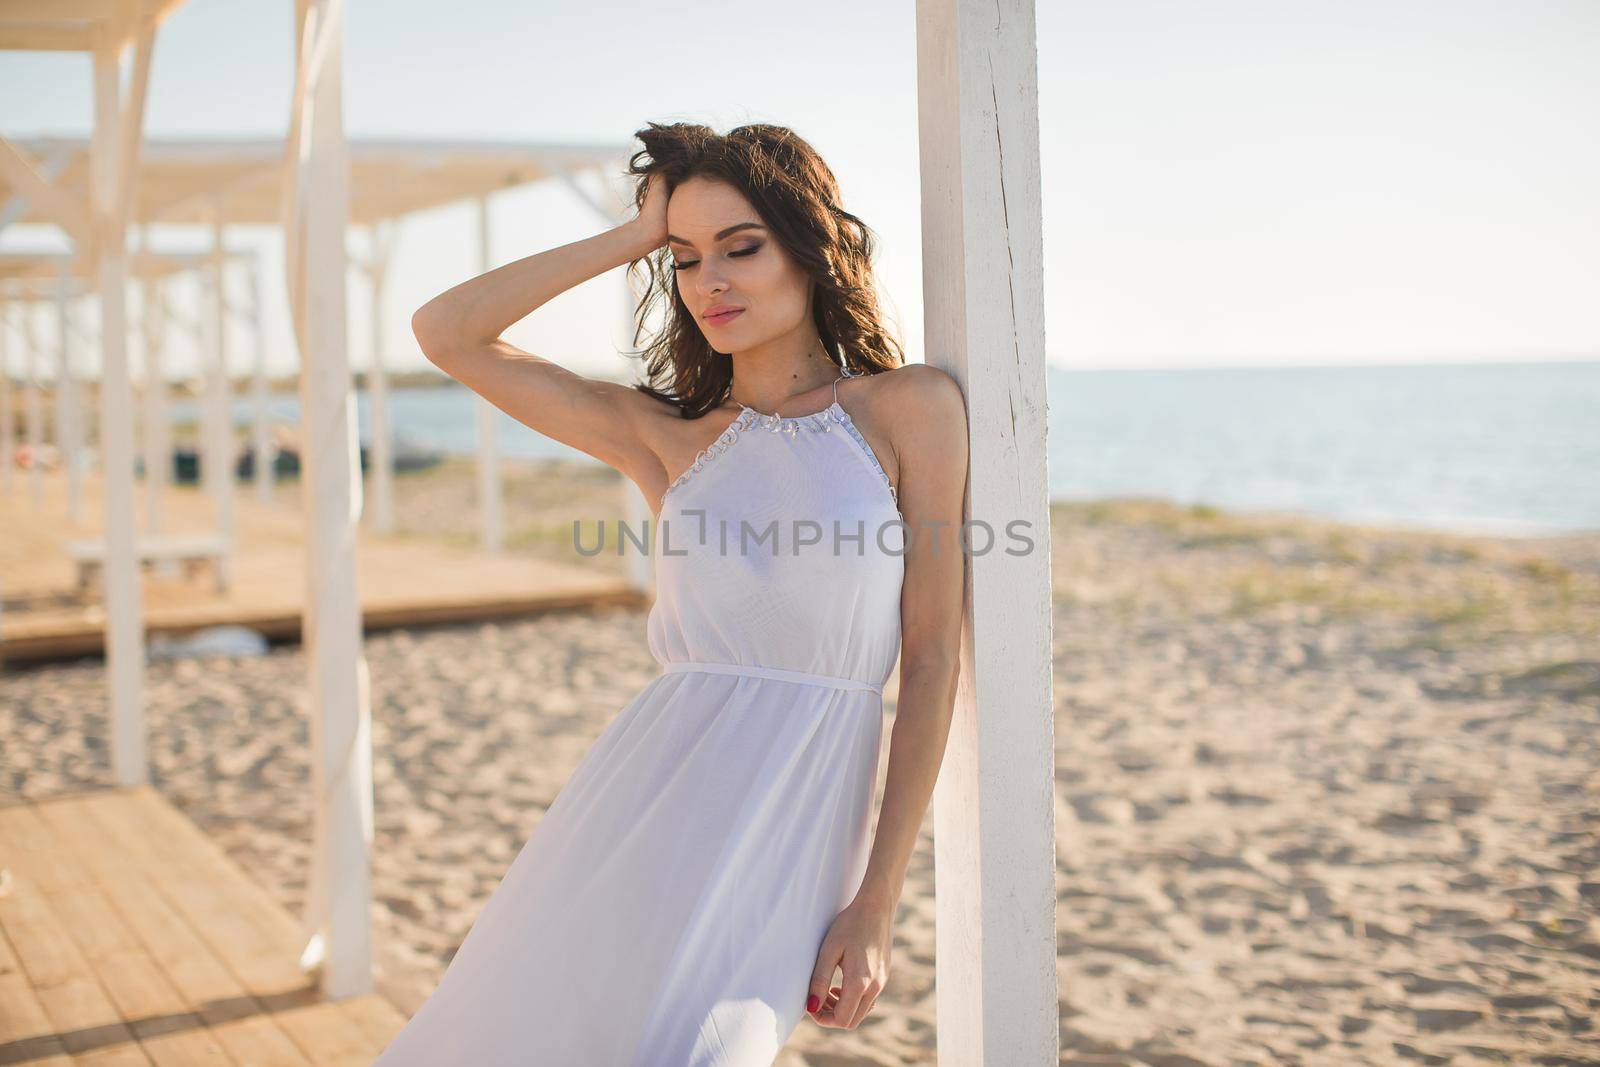 Beautiful girl on the beach in a white dress.